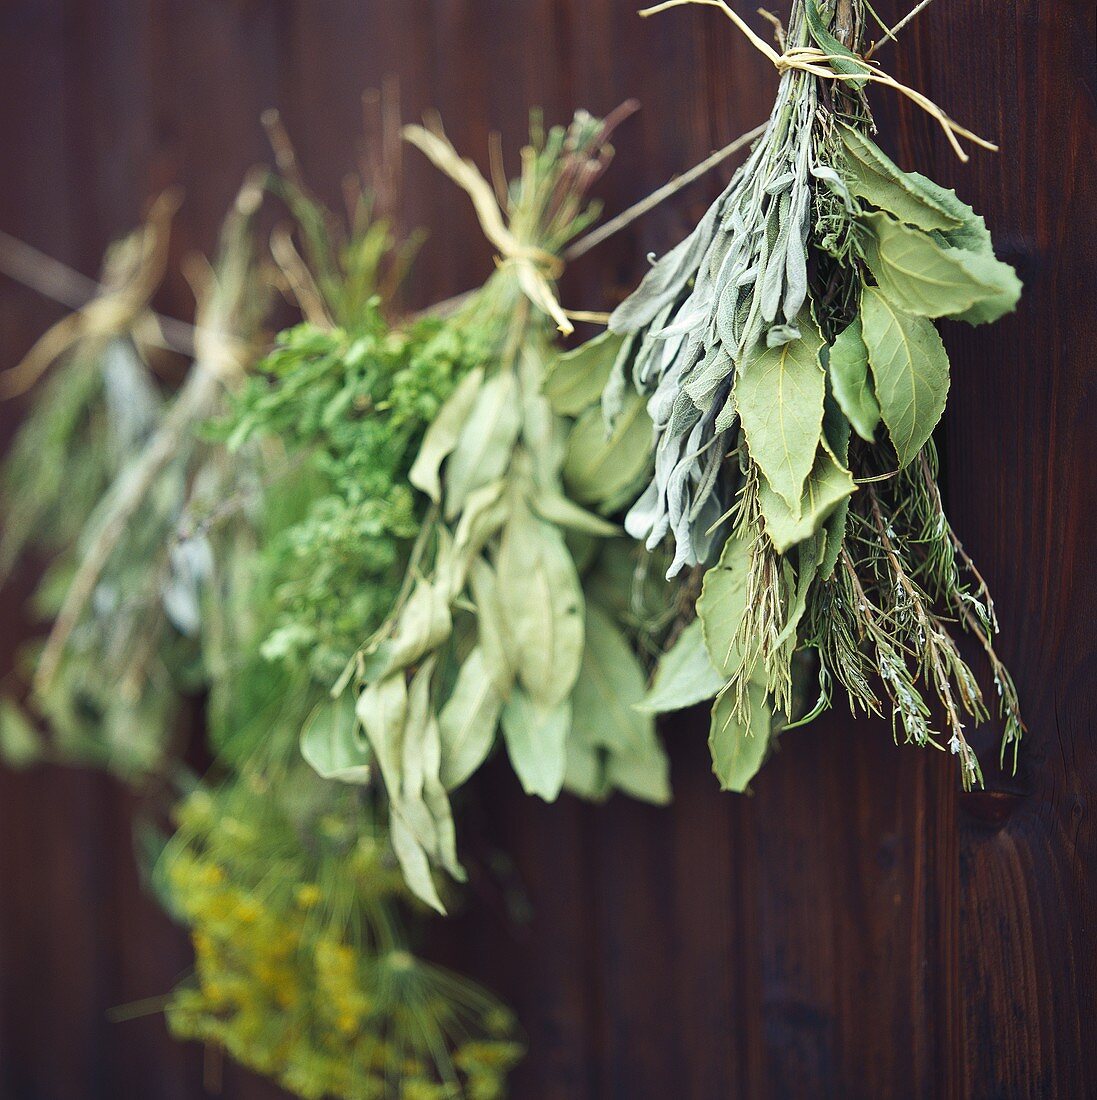 Dried bunches of herbs on dark wooden background